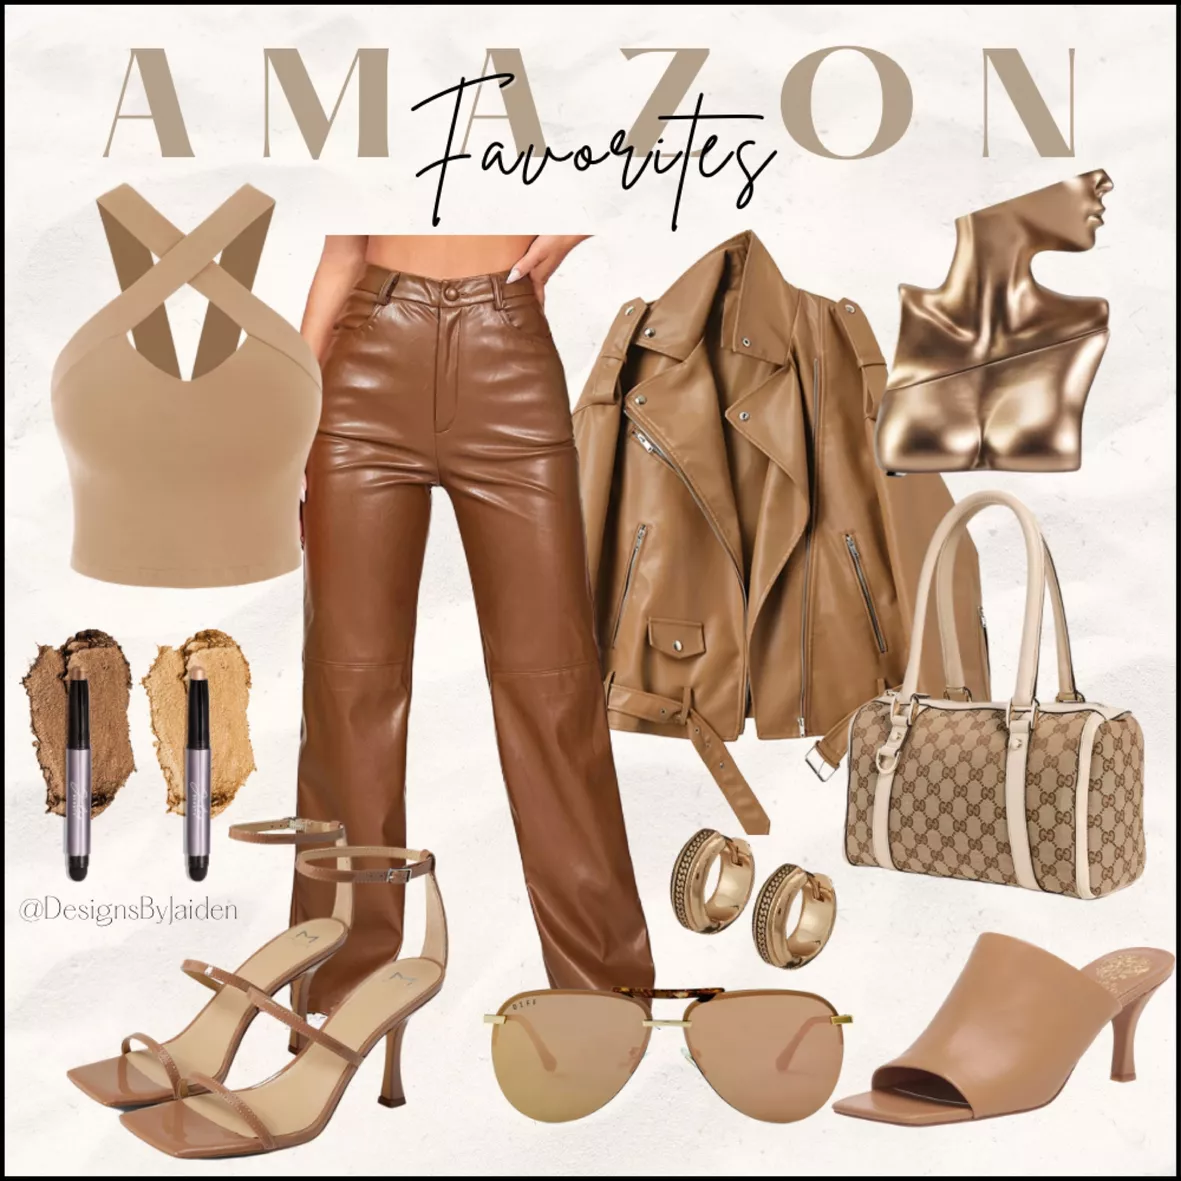 LEATHER PANTS OUTFIT IDEAS, HOW TO STYLE LEATHER PANTS, EVERYDAY FOR  STYLING